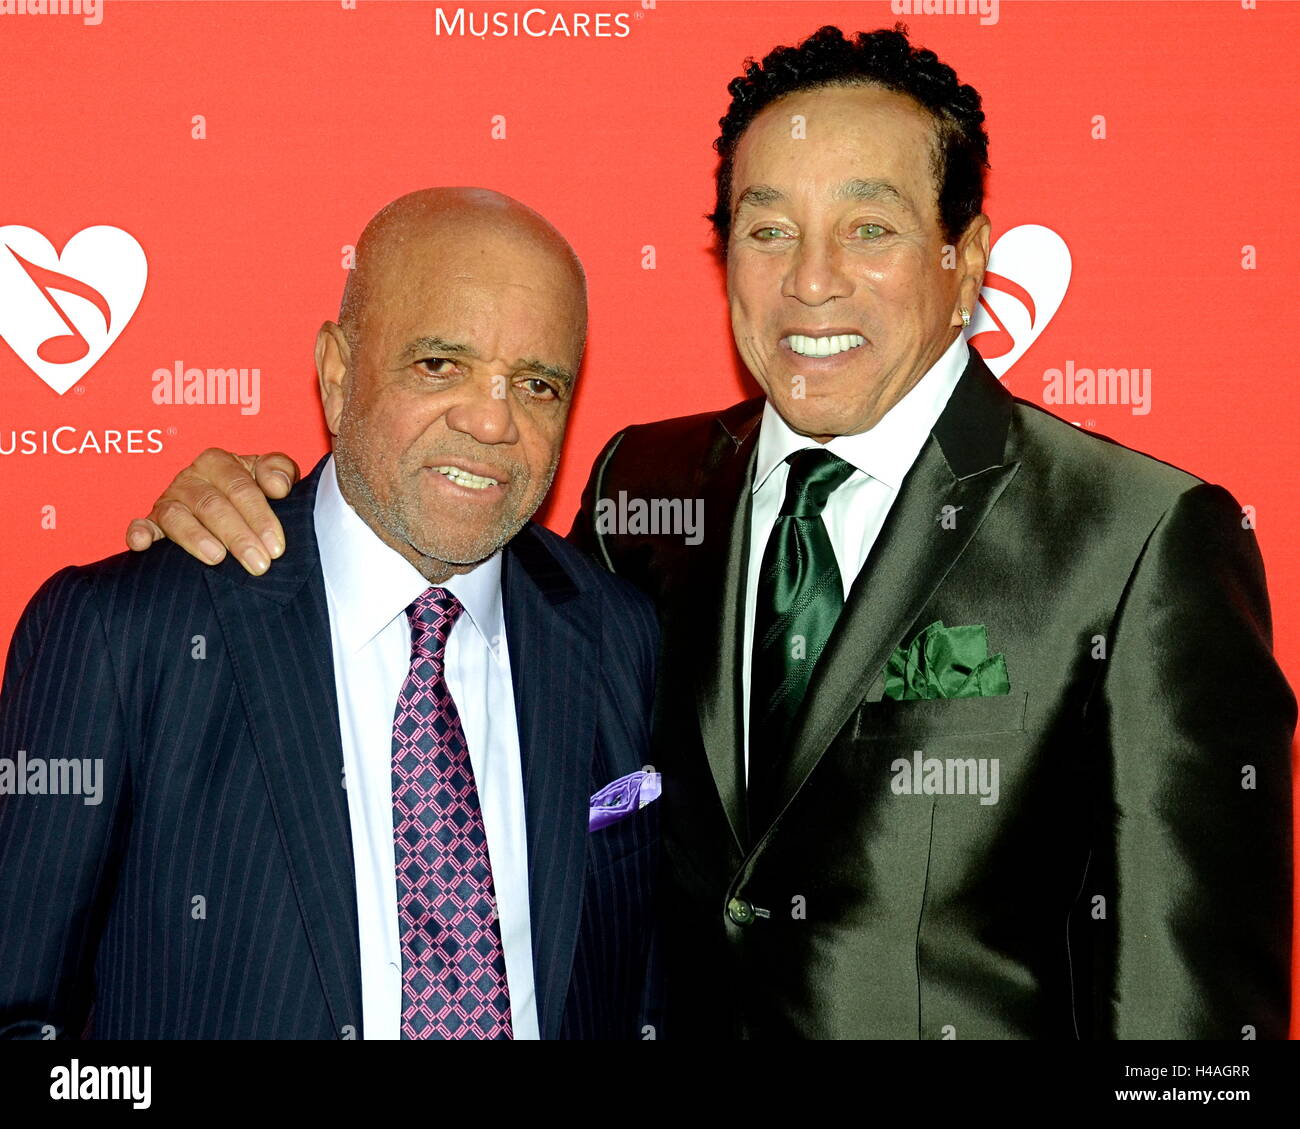 Smokey Robinson and Barry Gordy arrives for the 12th Annual MusiCares MAP Fund Tribute Concert at The Novo by Microsoft on May 19, 2016 in Los Angeles, California. Stock Photo